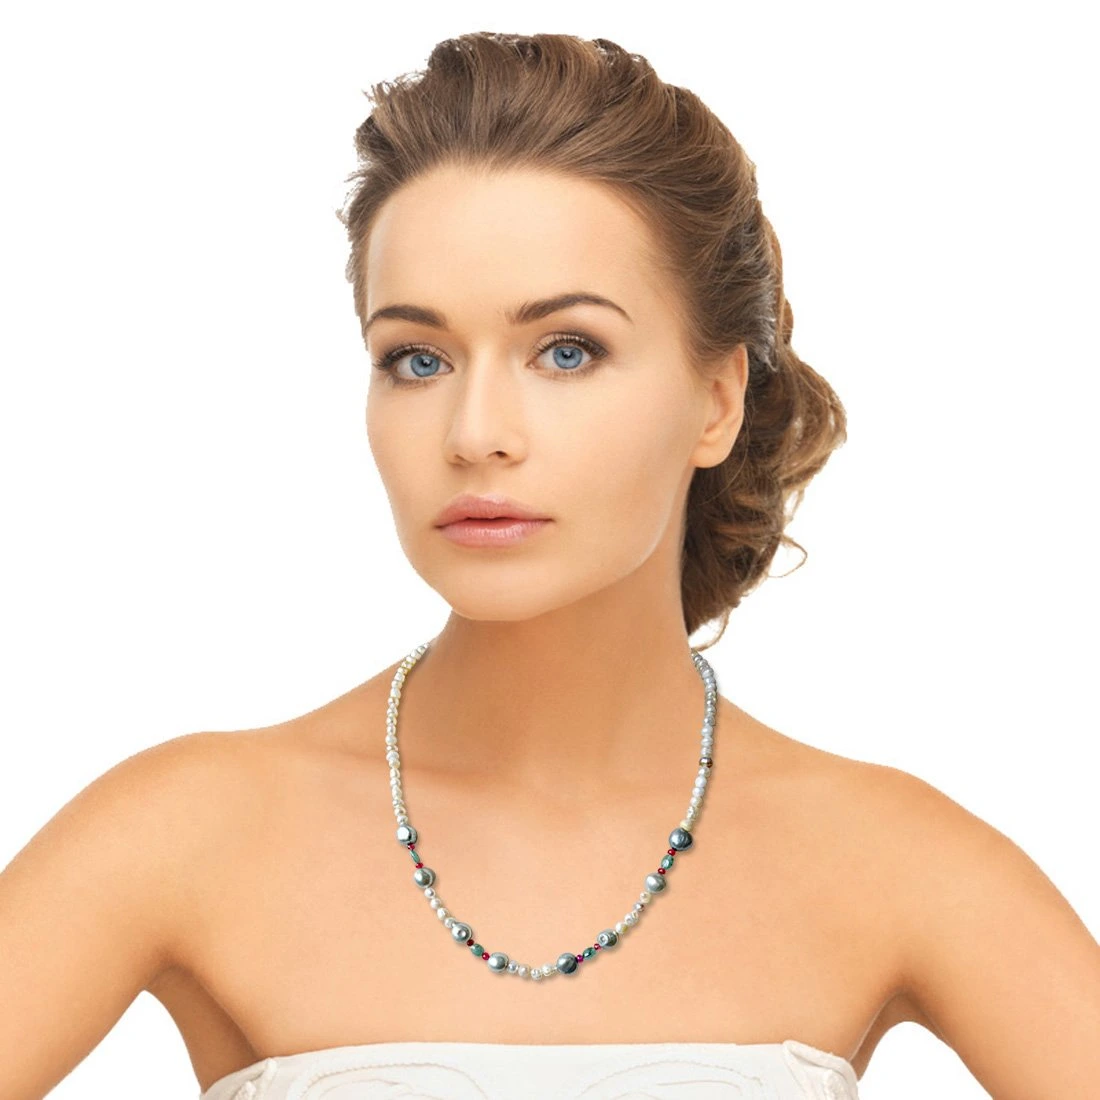 Single Line Real Emerald, Ruby Beads and White & Grey Pearl Necklace for Women (SN908)